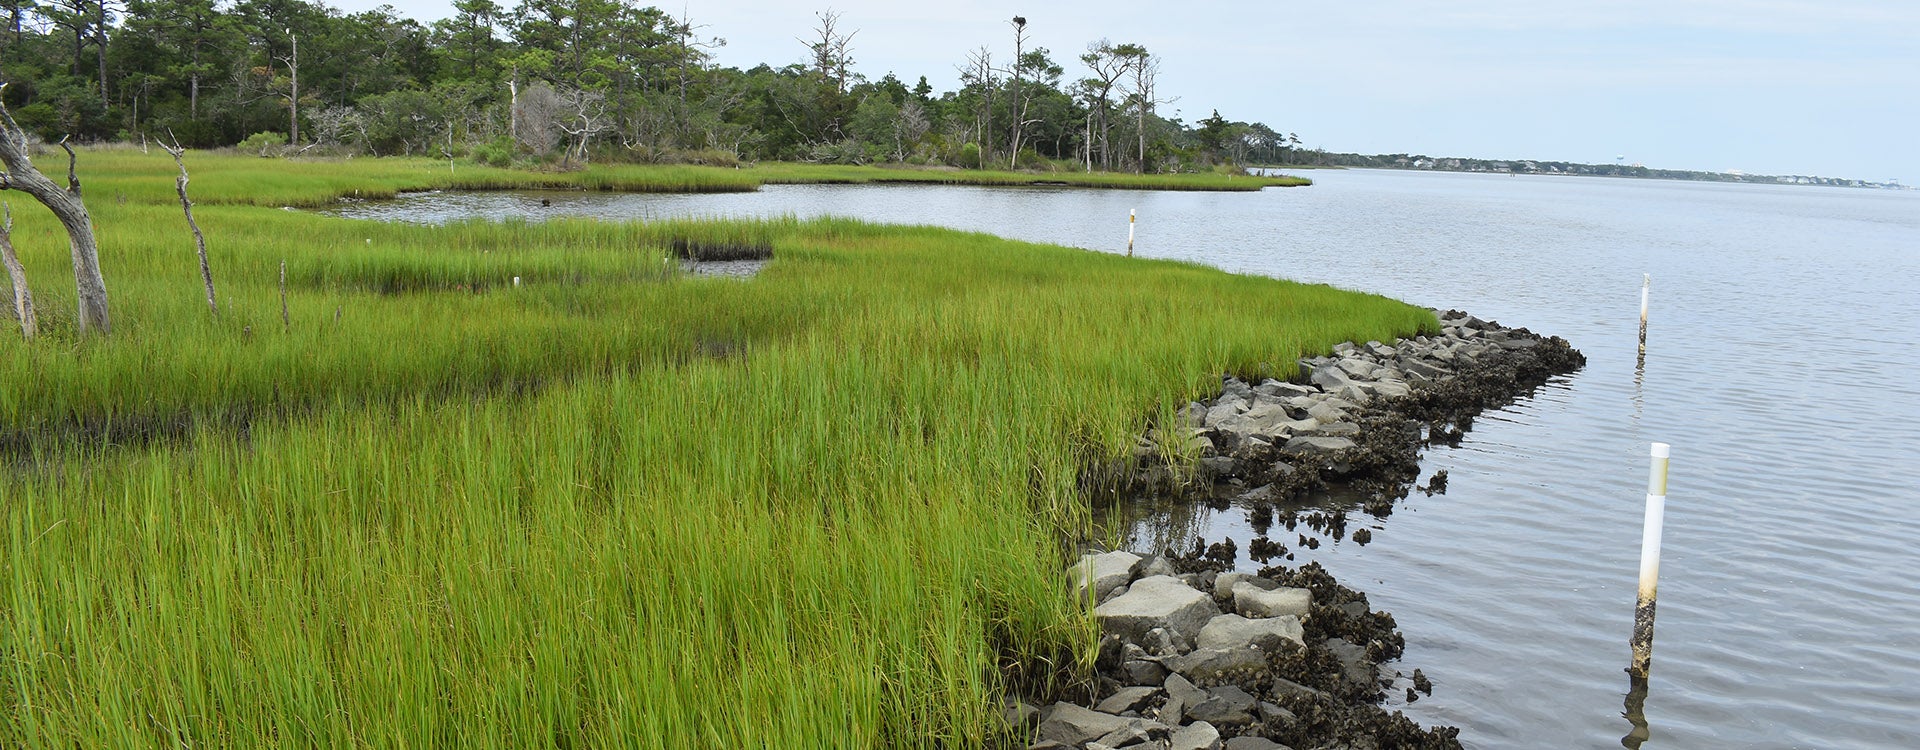 Downing spent the summer planting native marsh grasses, participating in educational outreach events, conducting cleanups of local waterways and building living shorelines to help reduce erosion.